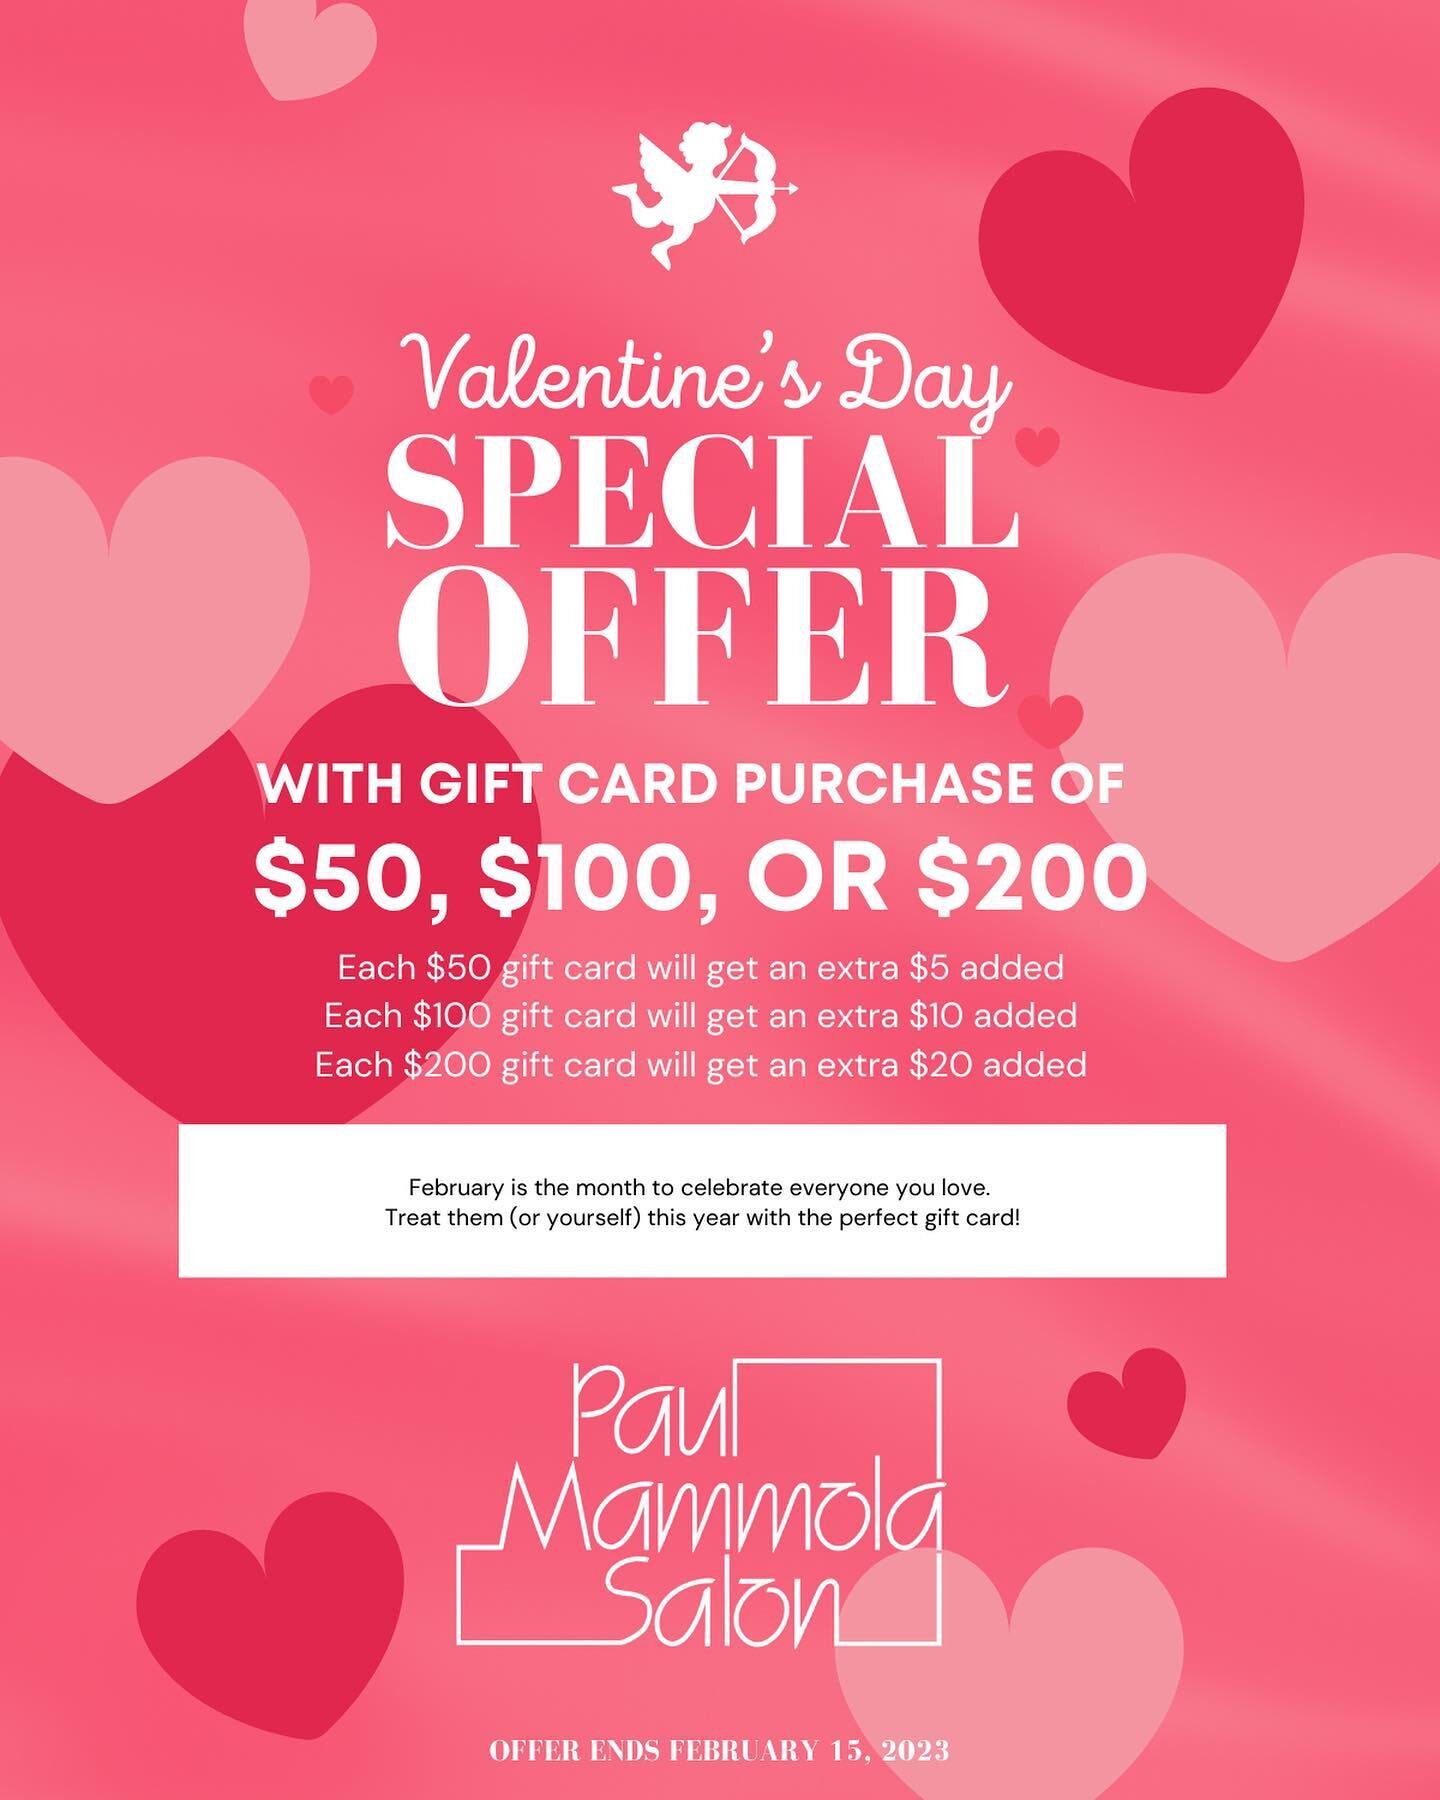 Valentines Day SPECIAL offer! The perfect gift to celebrate everyone you love (or to treat yourself)! Link in our bio ❤️

.
.
.
.
#valentinesgift #giftideas #lexingtonma #bostonsalon #bestgiftboston #bostongift #shoplocal #bostonsmallbusiness #smallb